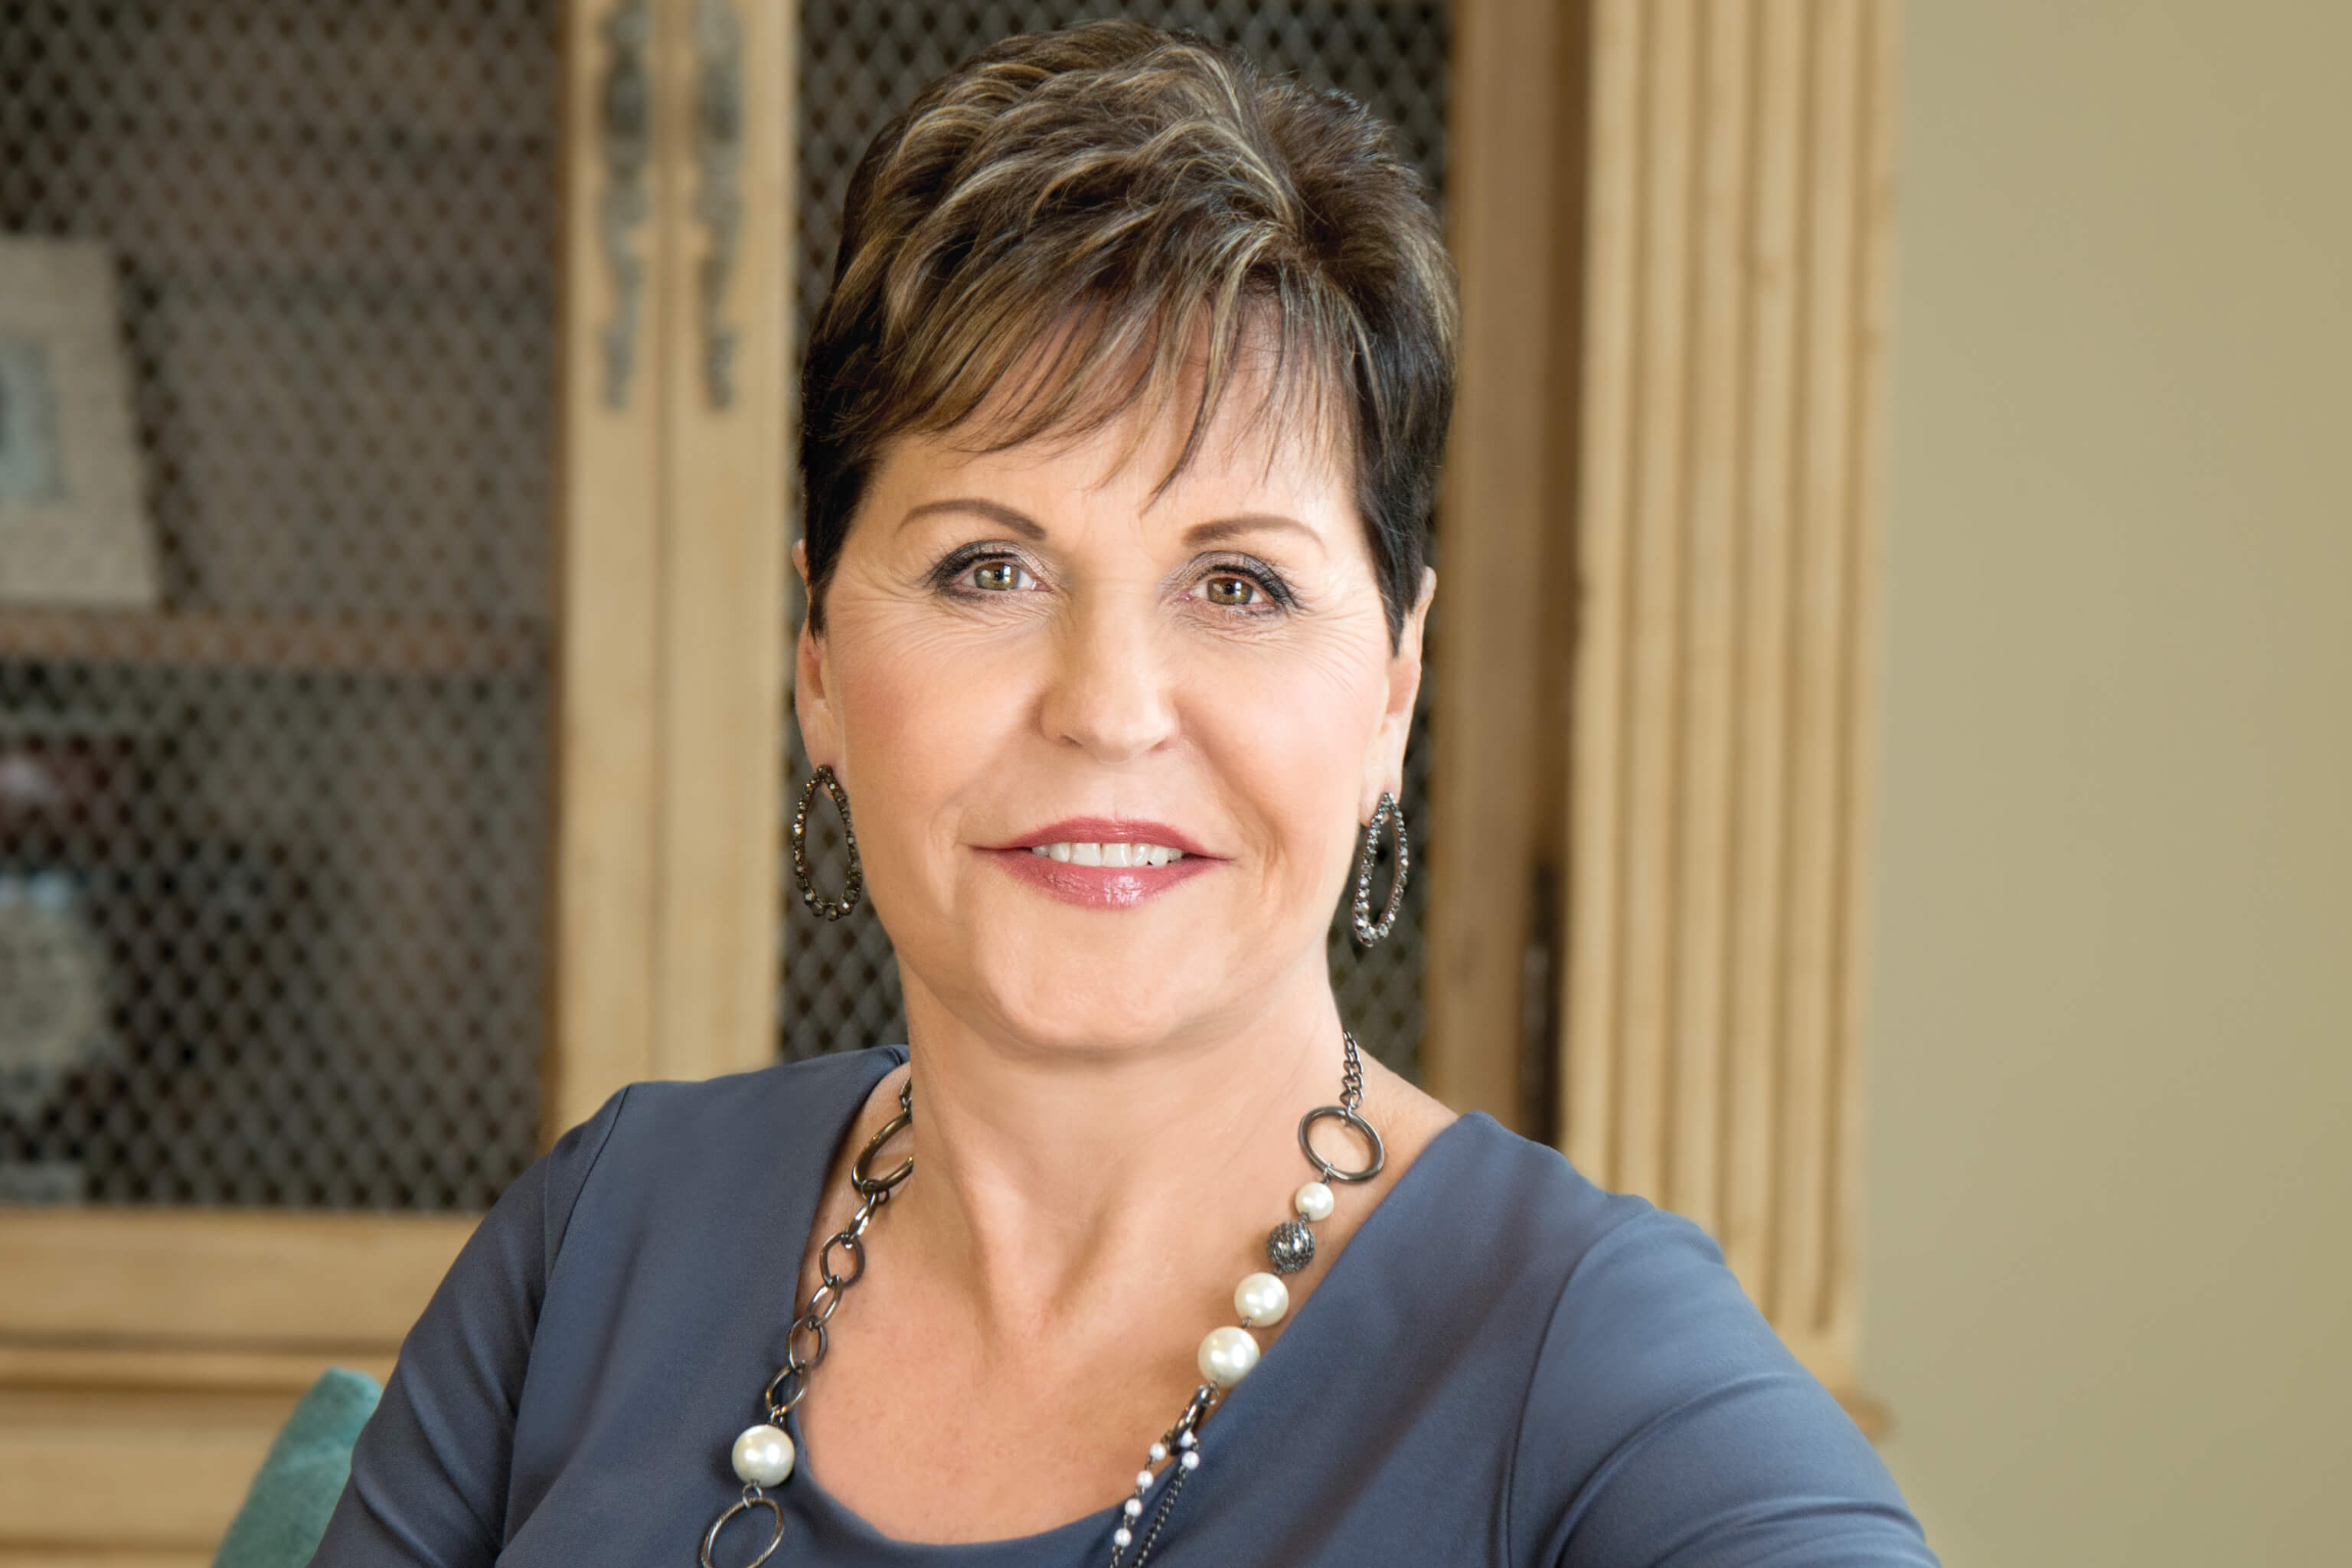 23 Captivating Facts About Joyce Meyer - Facts.net